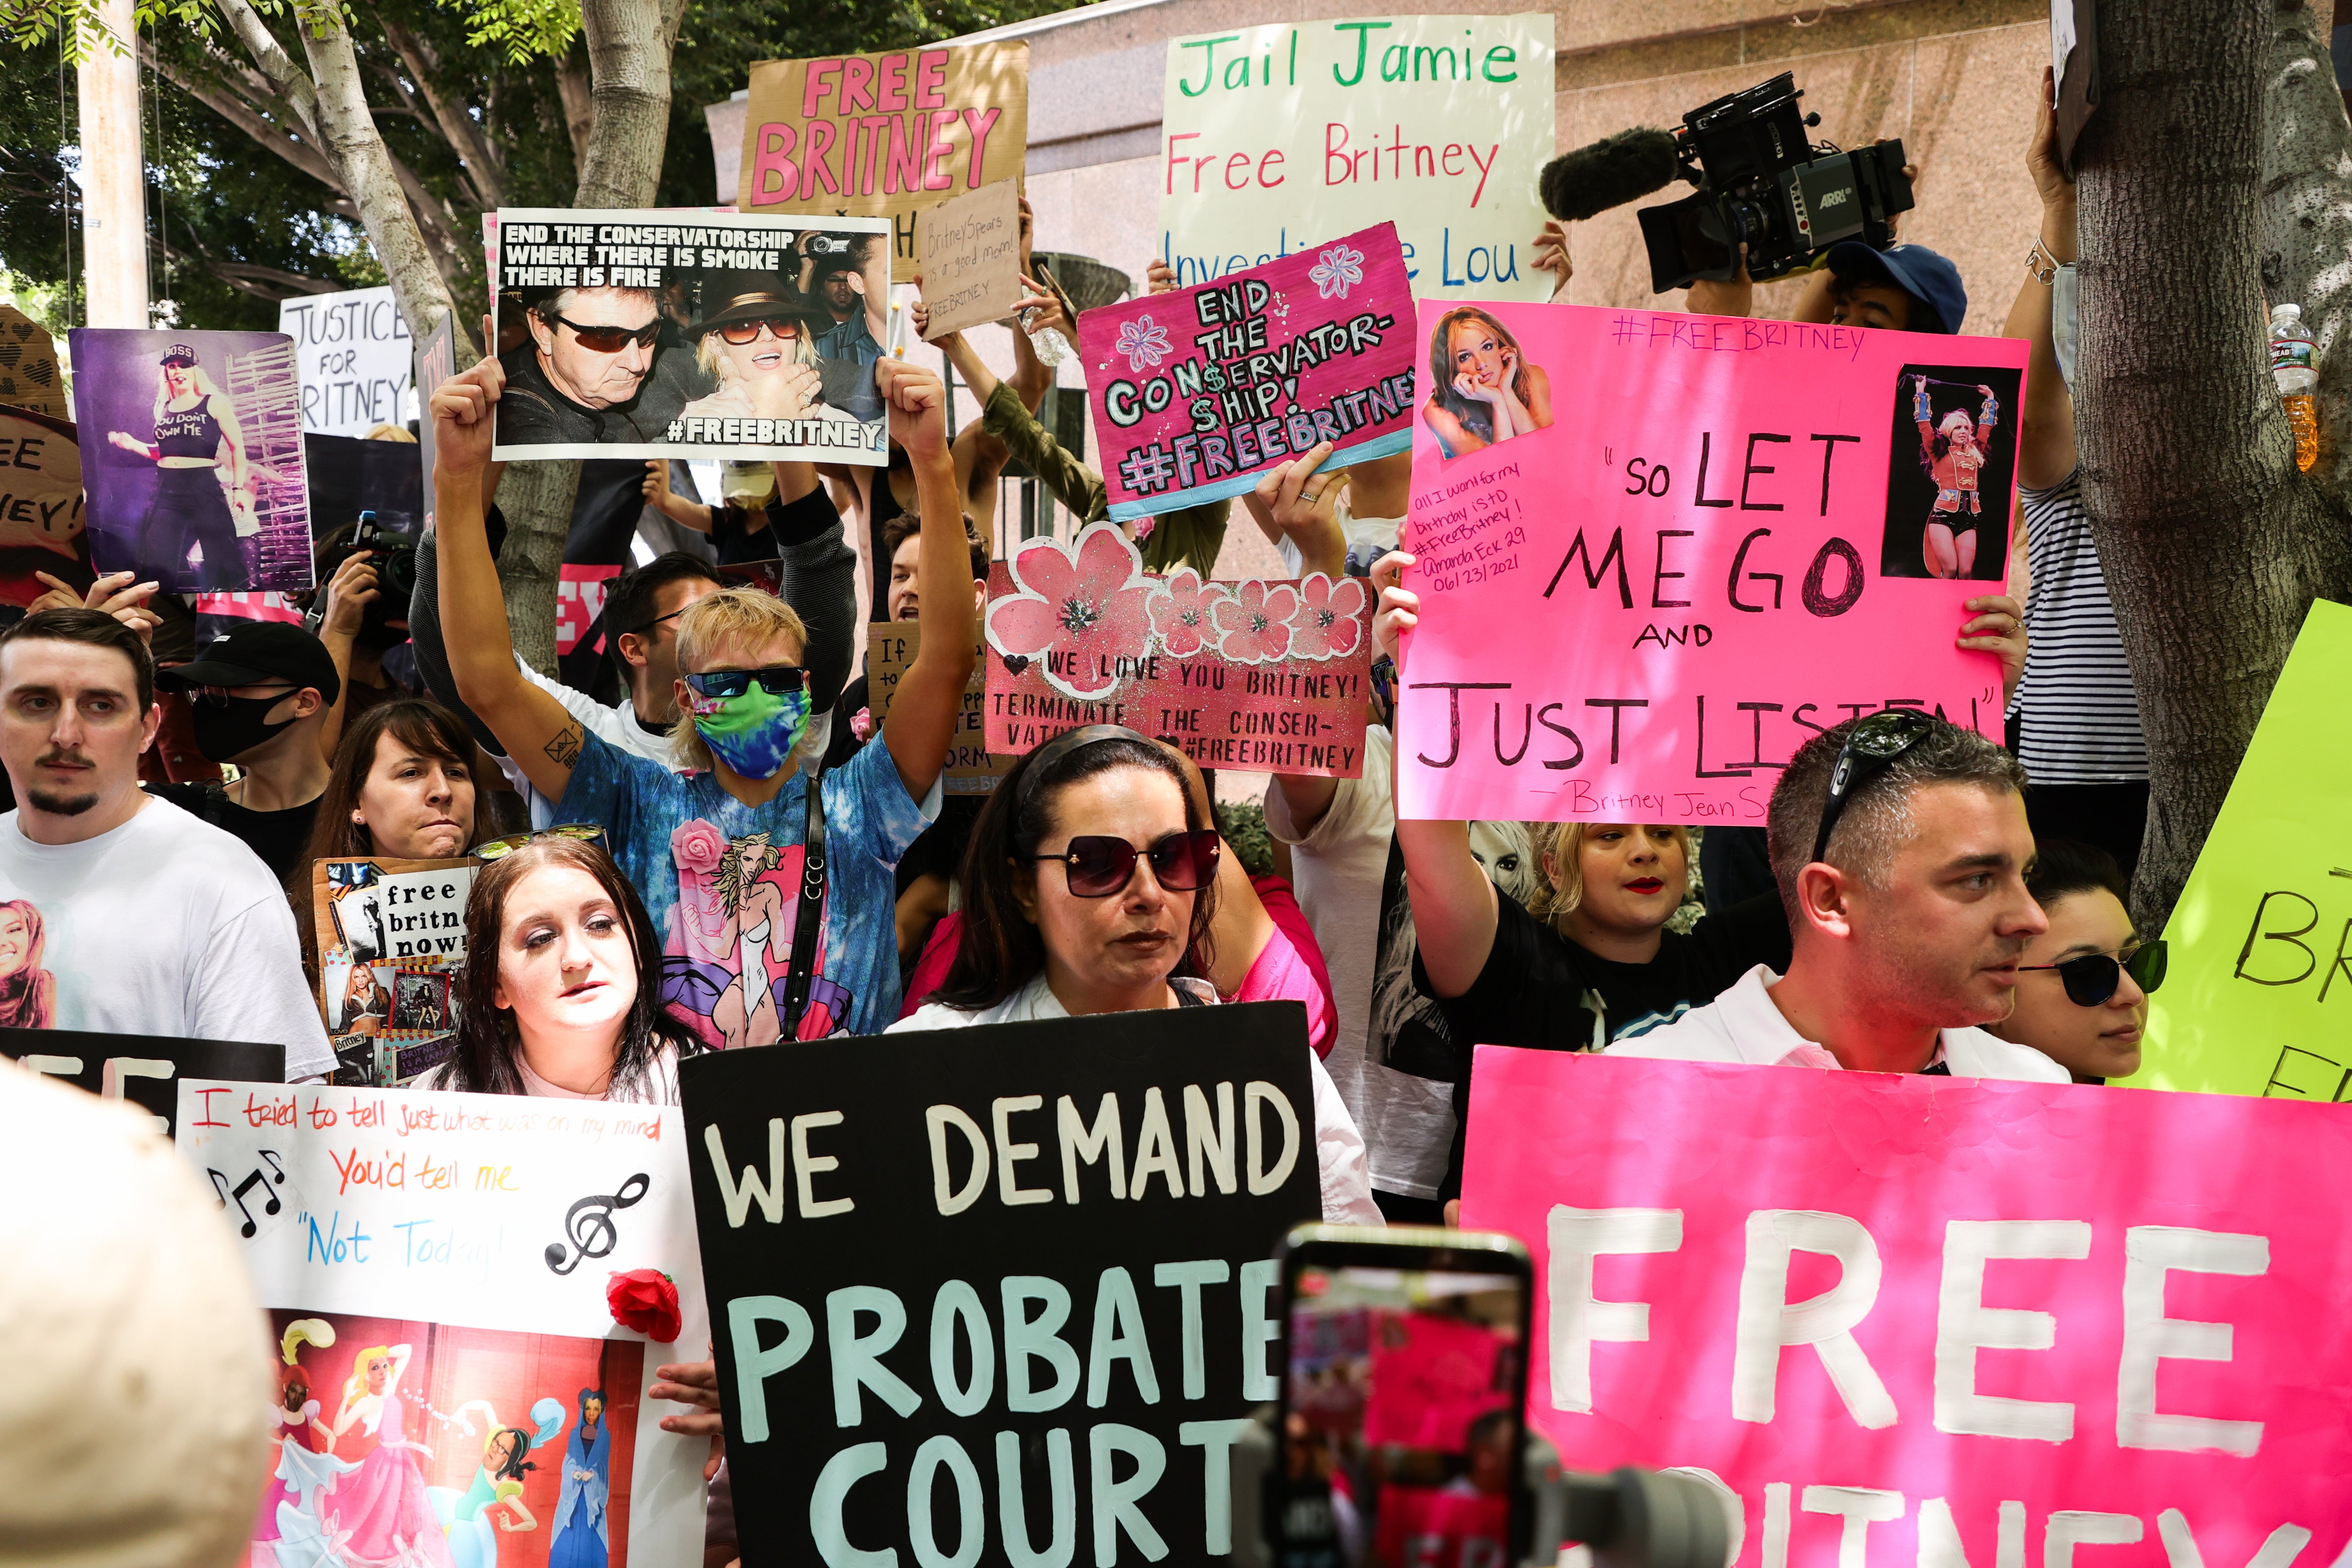 Britney fans protest ahead of the conservatorship hearing on 23 June